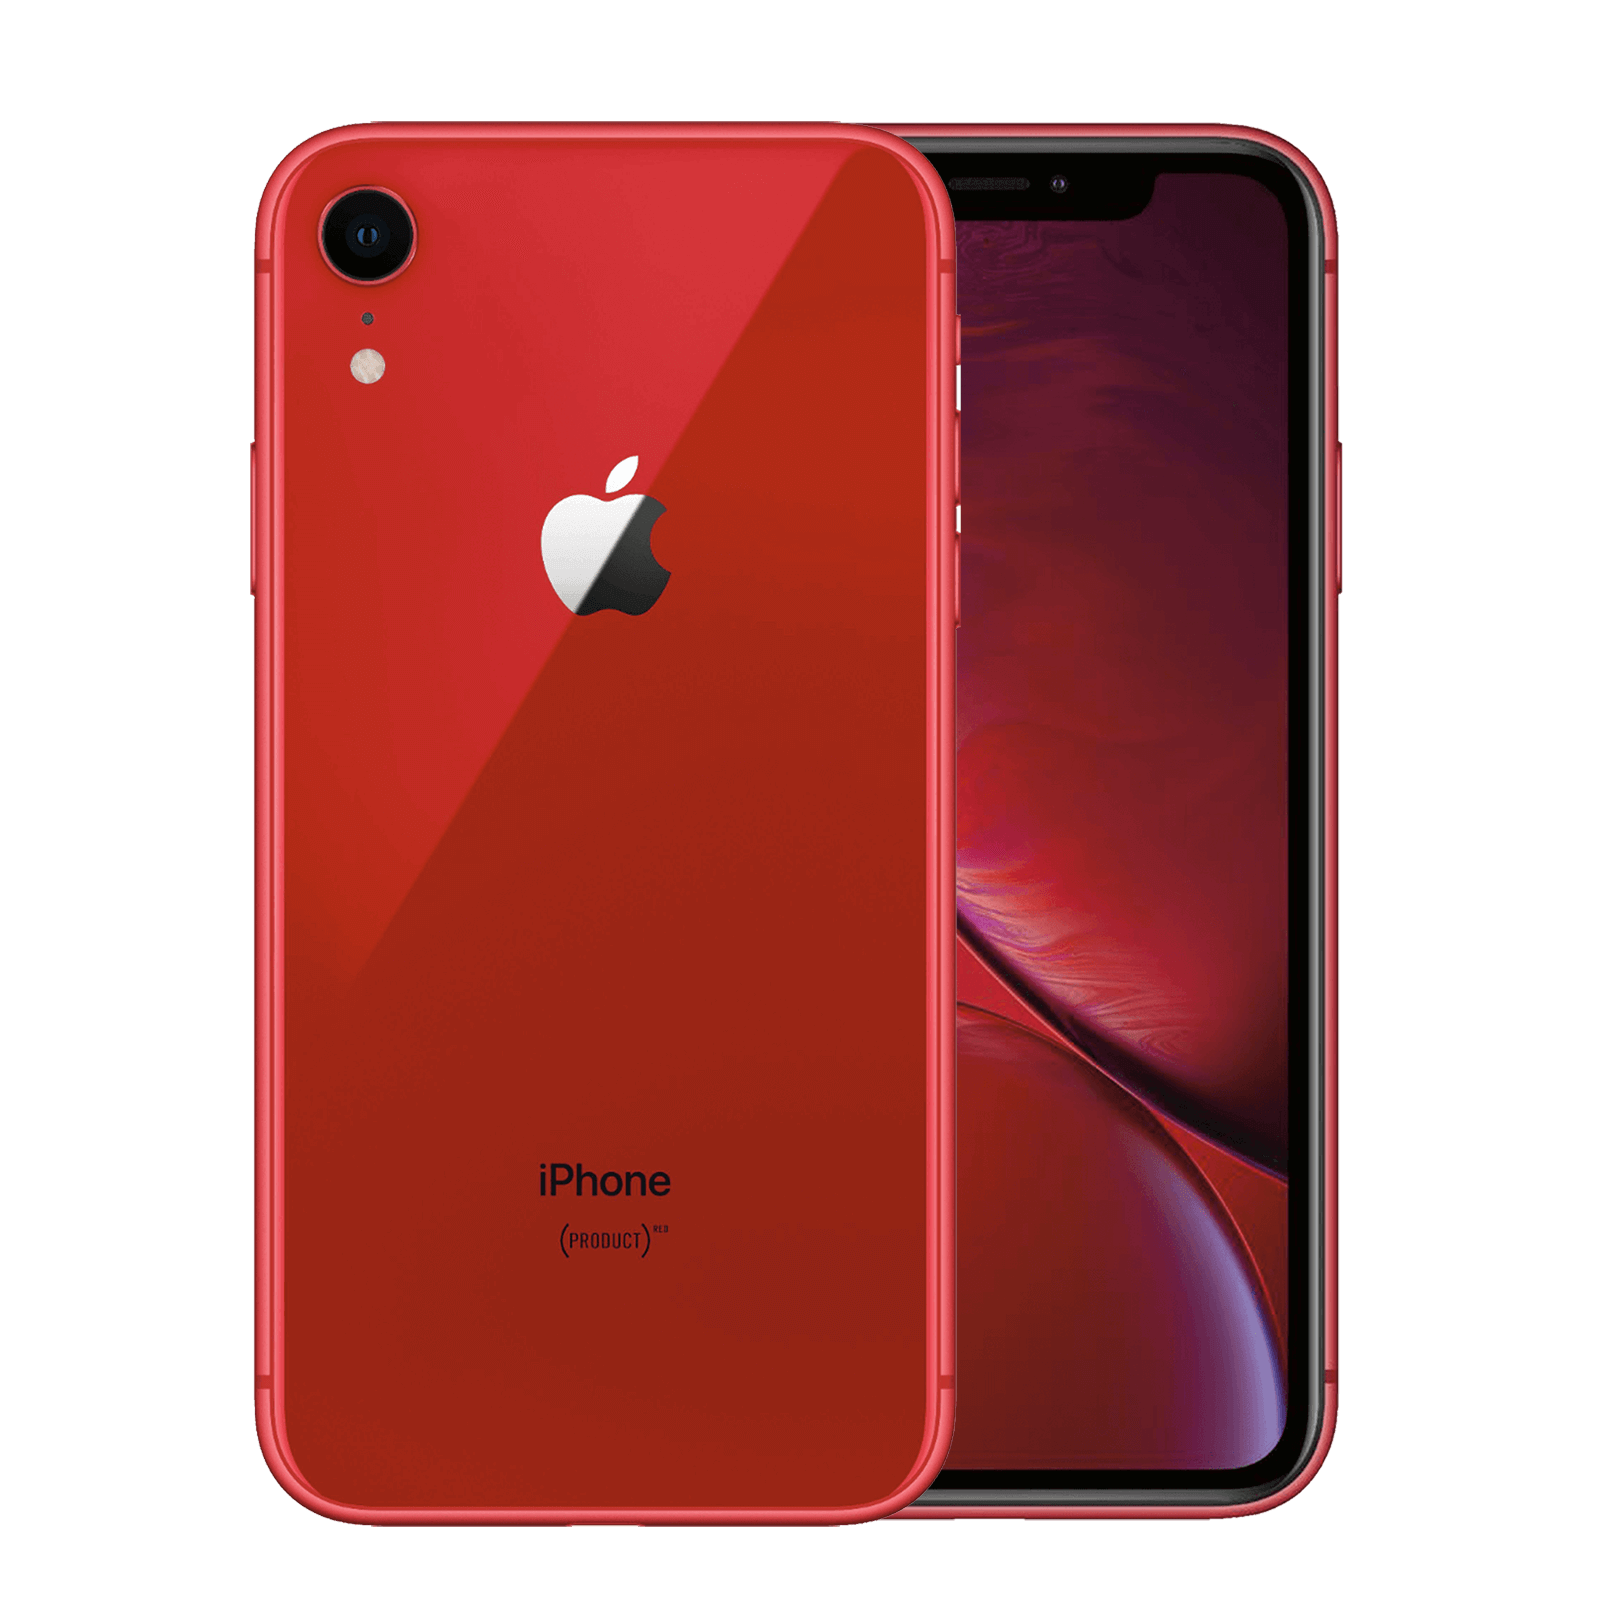 Apple iPhone XR 64GB Product Red Fair - AT&T